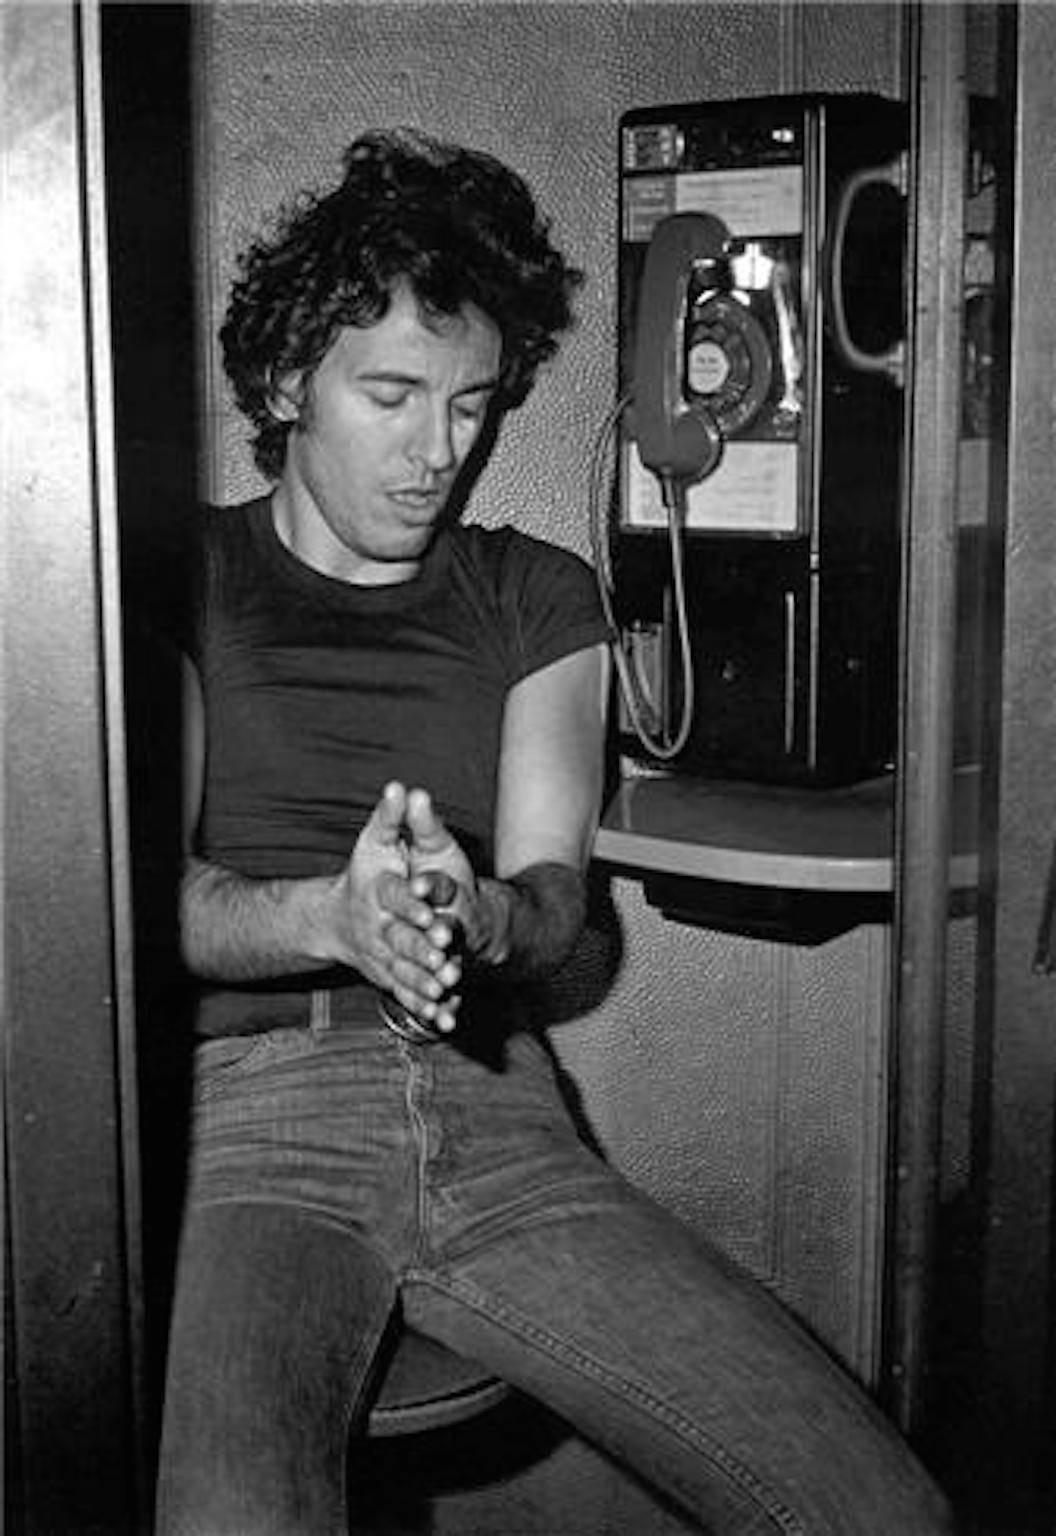 Bruce Springsteen The Call 1978 - Photograph by Frank Stefanko